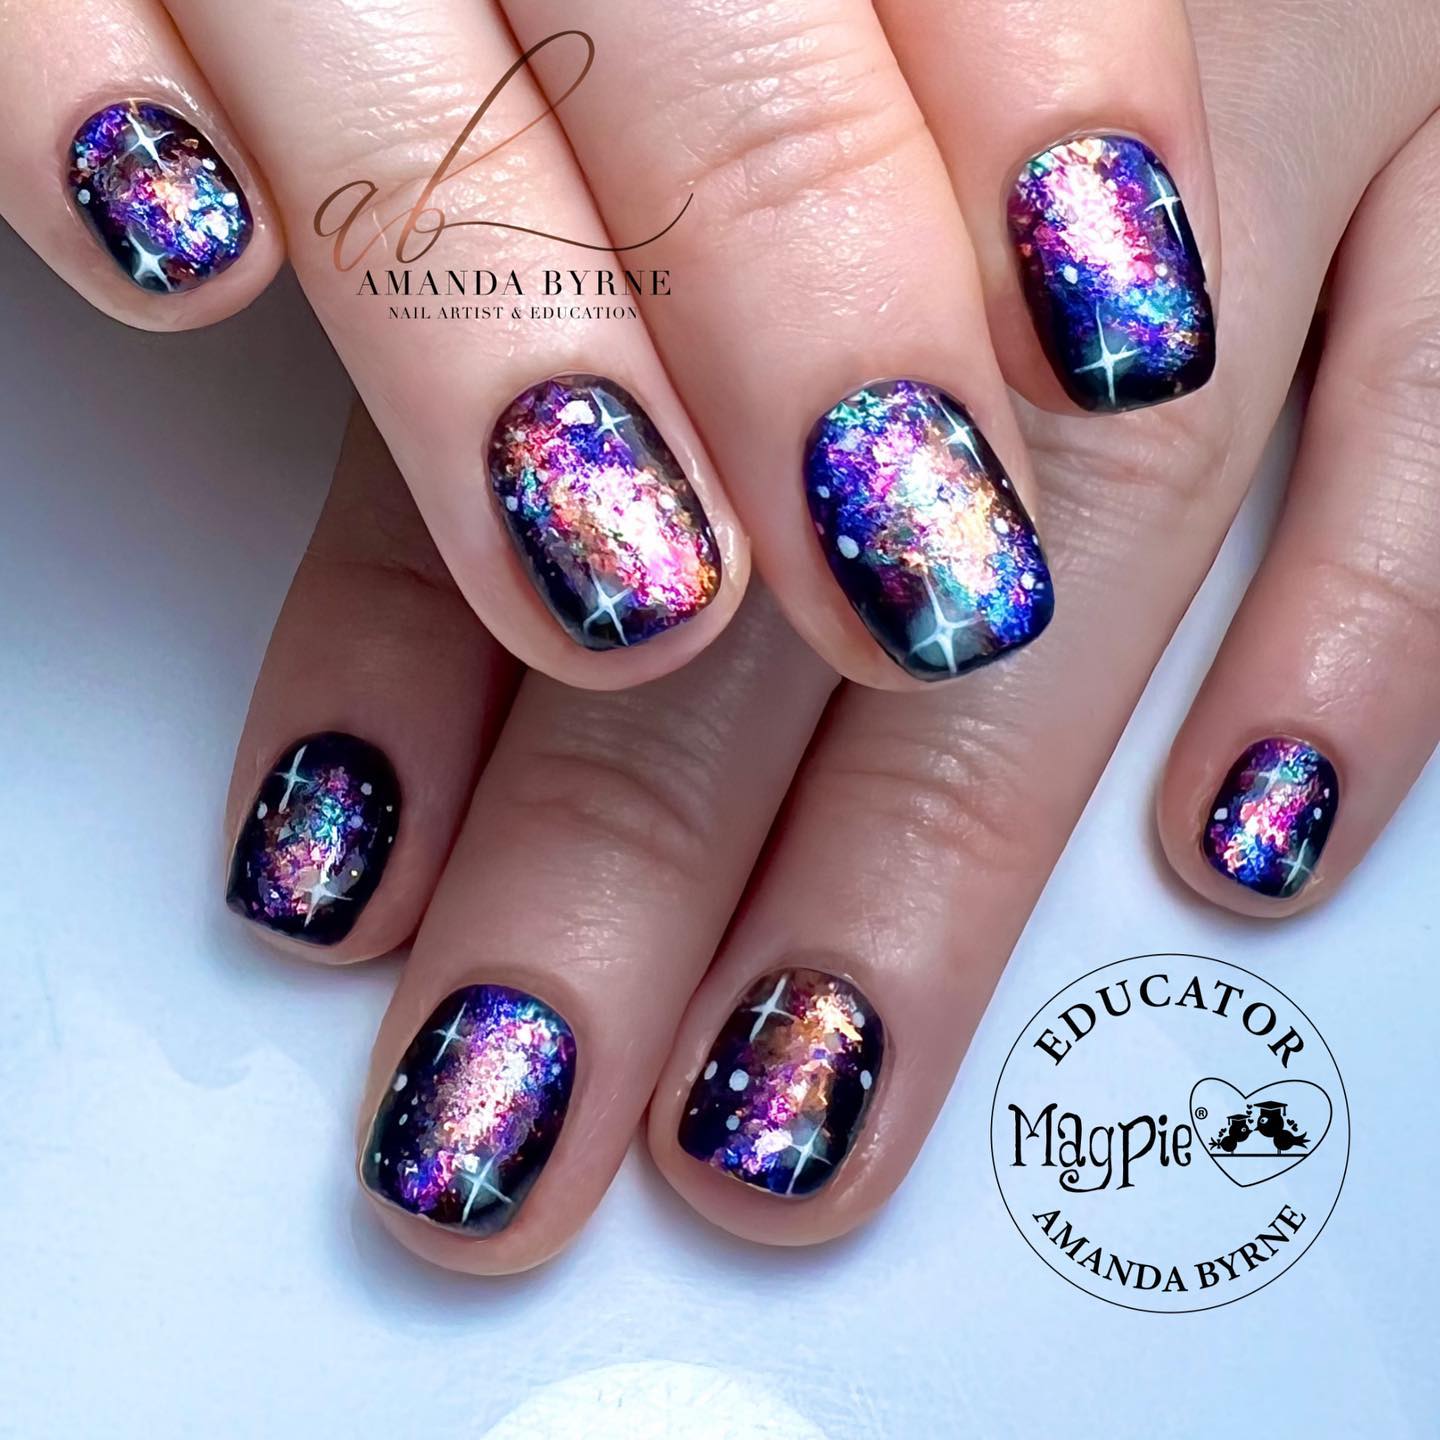 Galaxy design nails are a unique nail art style that mimics the stars in a galaxy. It's a very popular look right now, so if you're looking for some new ideas and inspiration, this is one of the best nail designs, so let's go and get it.